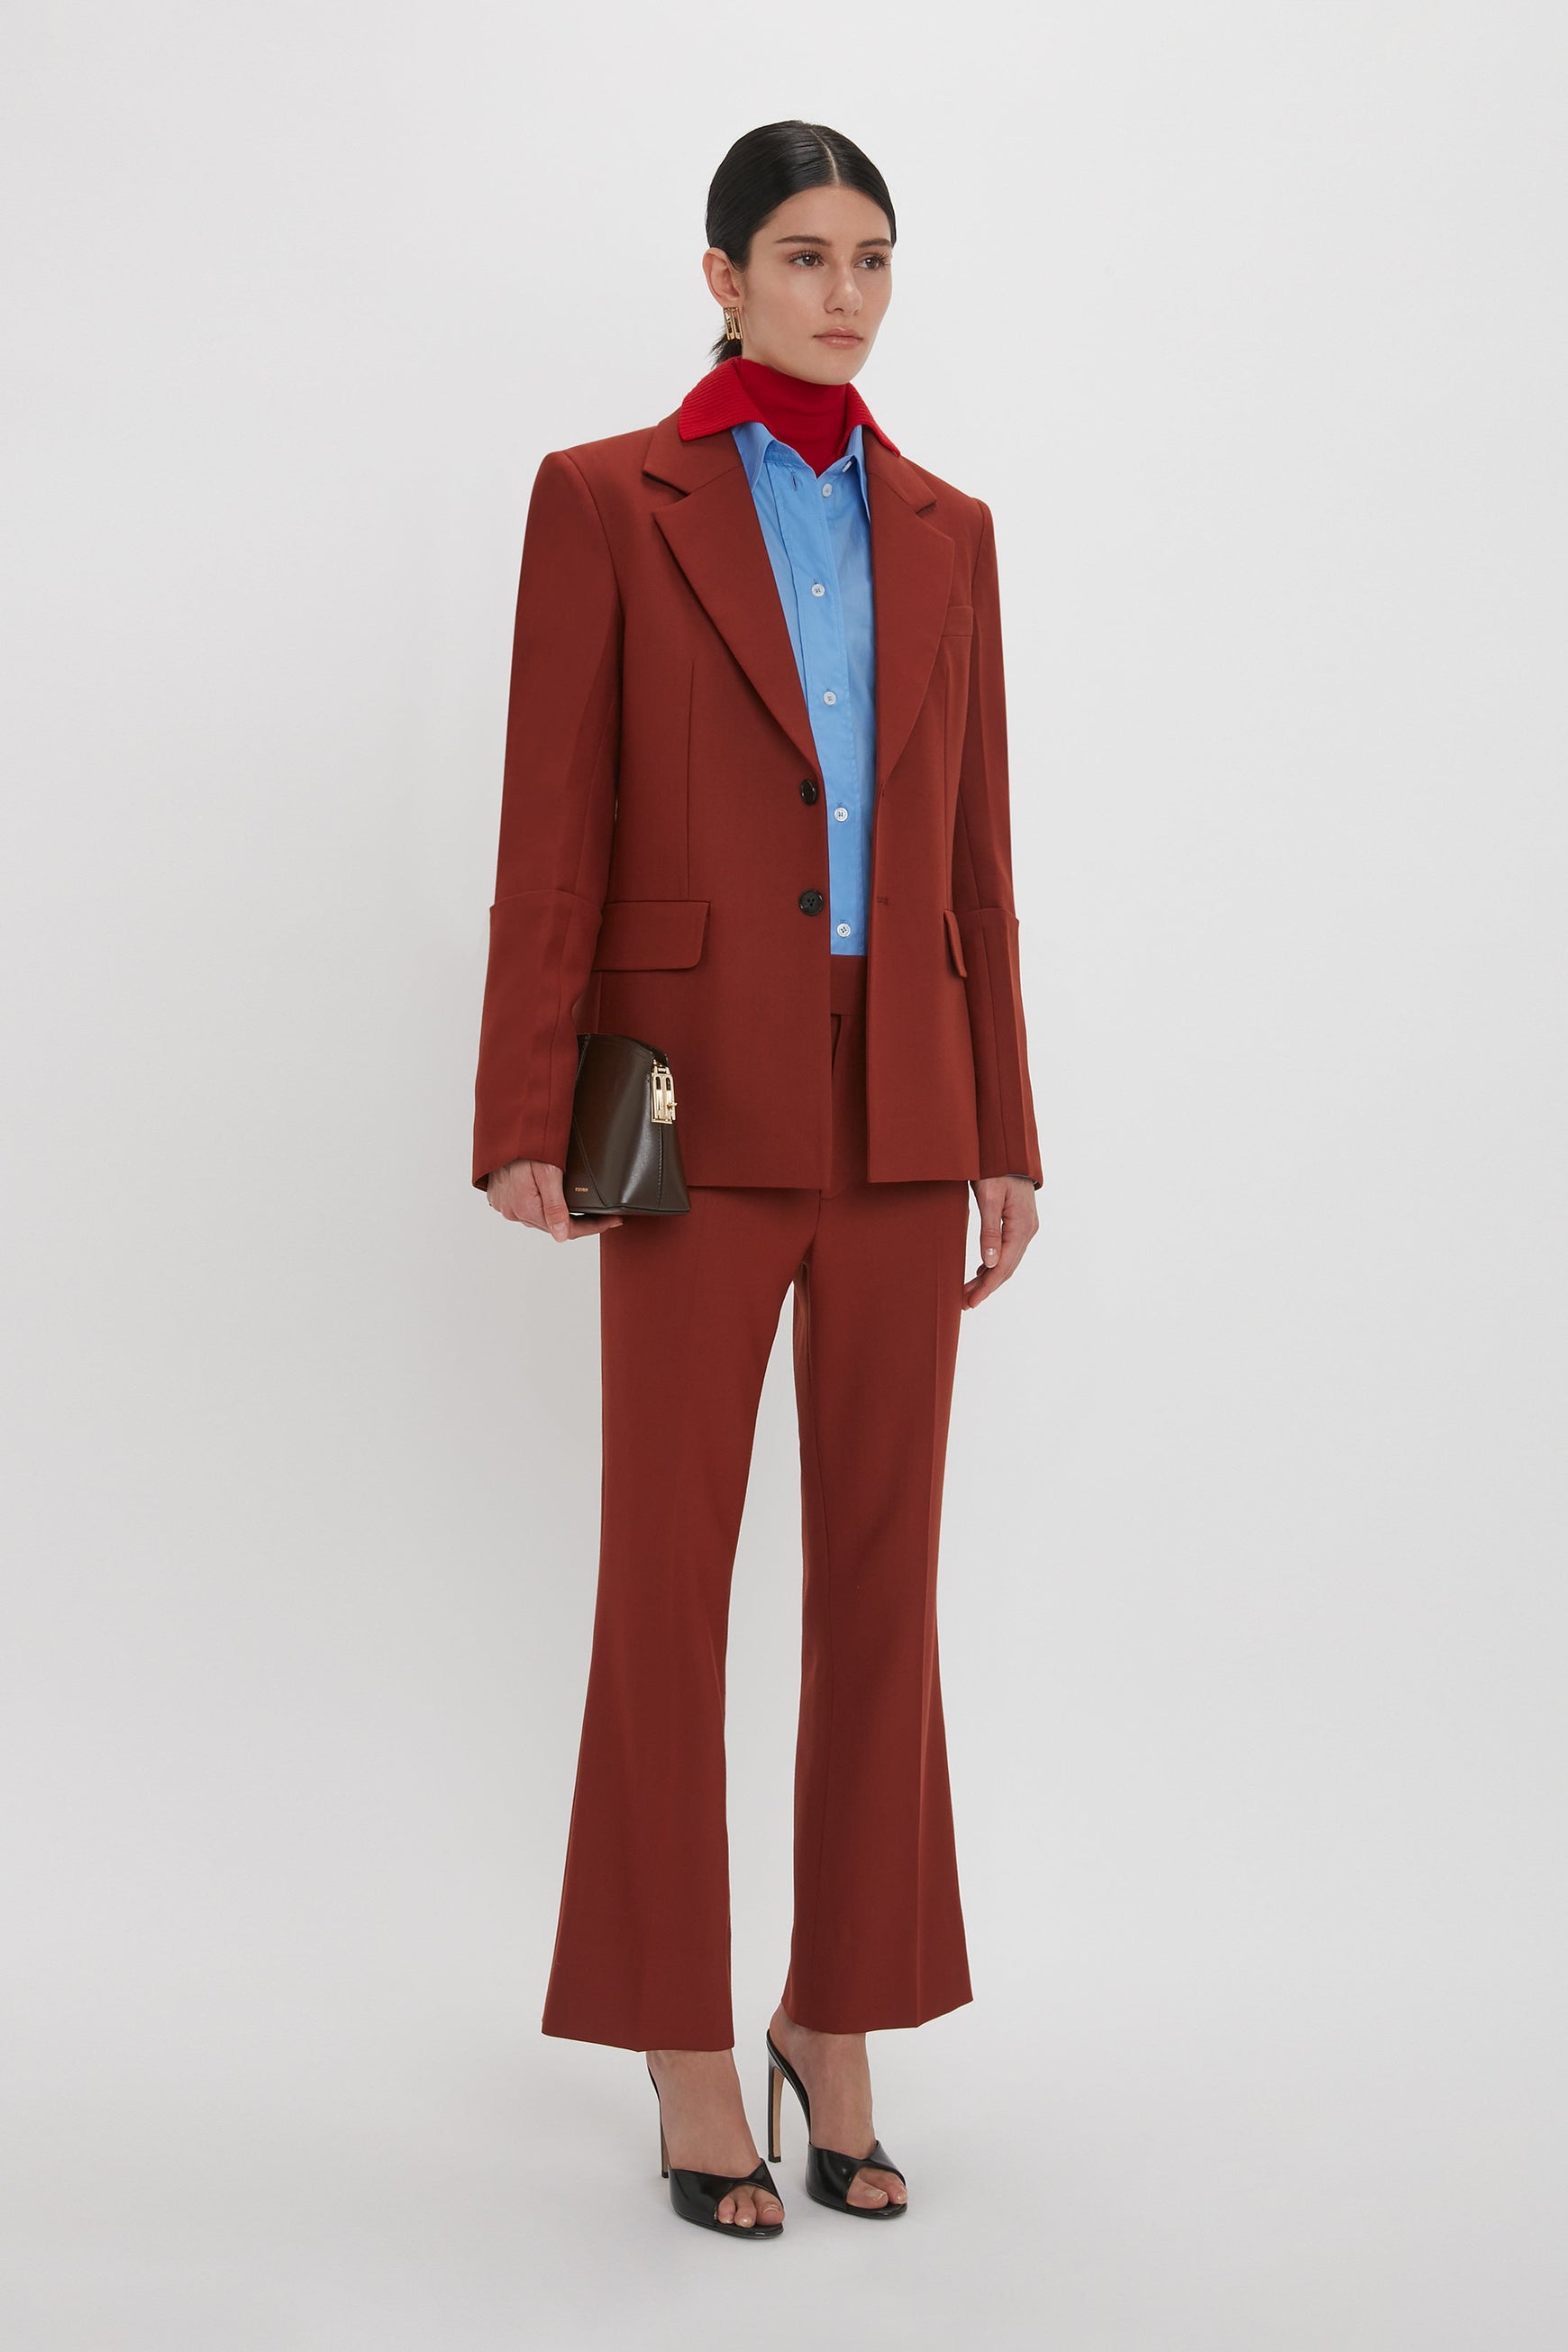 Person stands against a plain background wearing a red Sleeve Detail Patch Pocket Jacket In Russet by Victoria Beckham, a blue shirt, and black heels. They hold a brown handbag and have a red scarf tied around their neck, showcasing contemporary detailing.